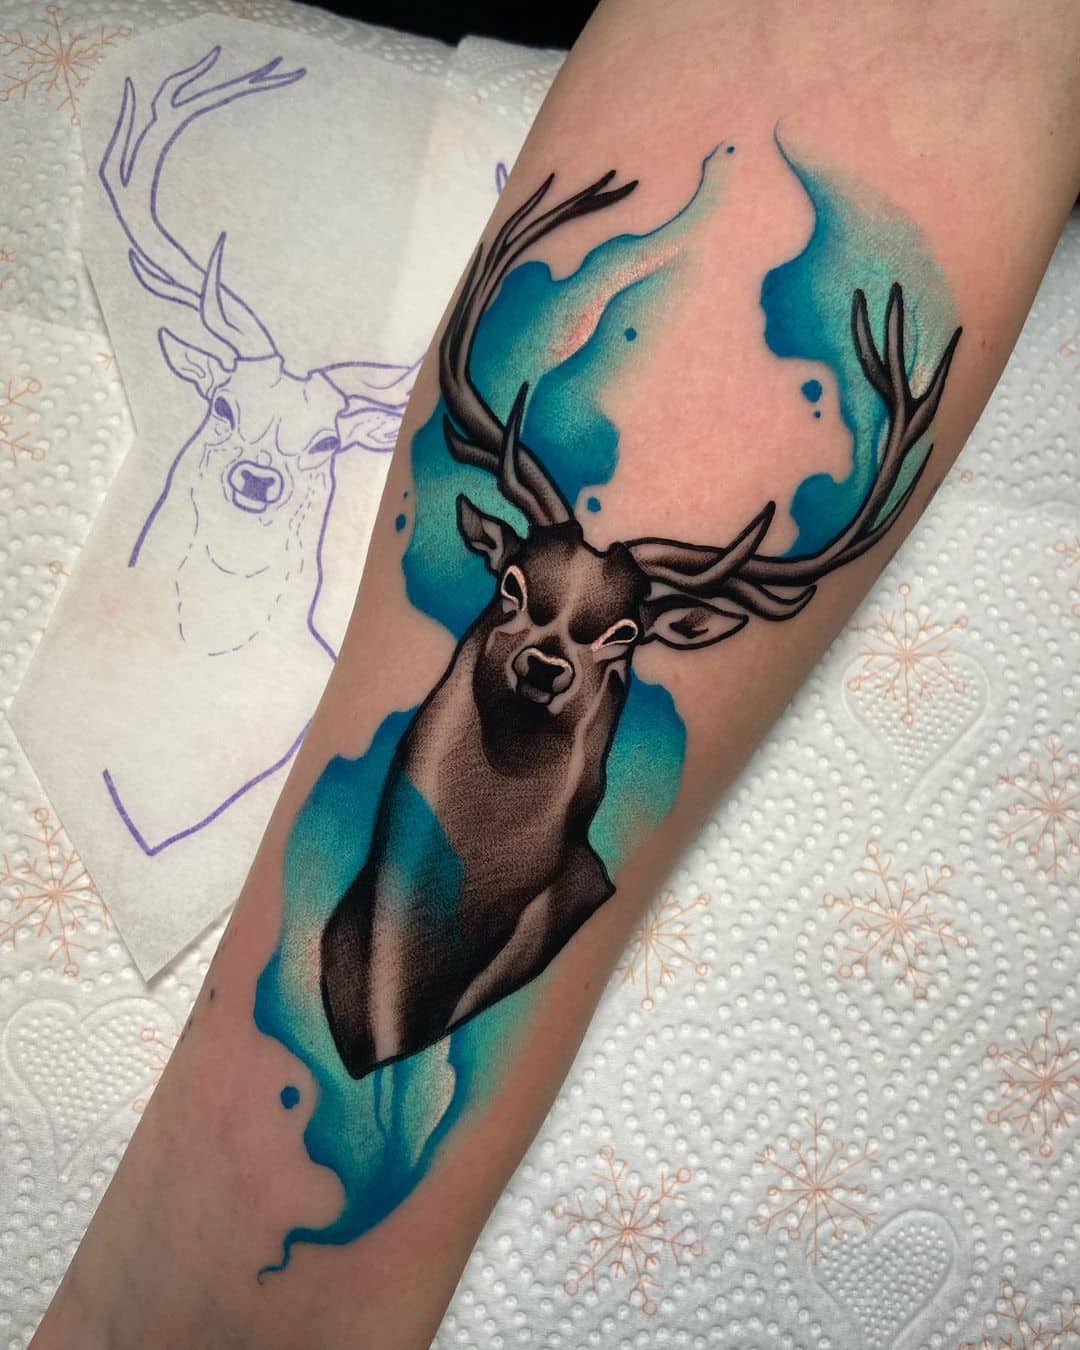 25 Incredible Deer Tattoo Design Ideas and Their Meaning - Wittyduck